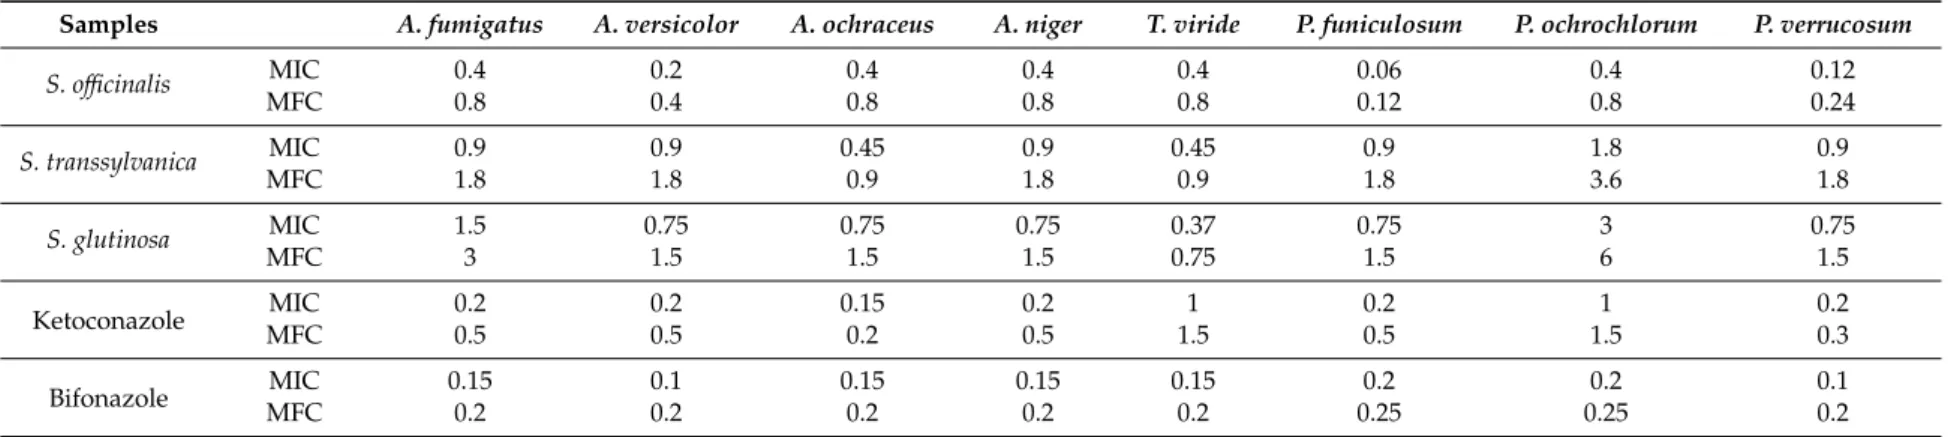 Table 8. Antifungal activity of the extracts obtained from S. transsylvanica, S. glutinosa and S